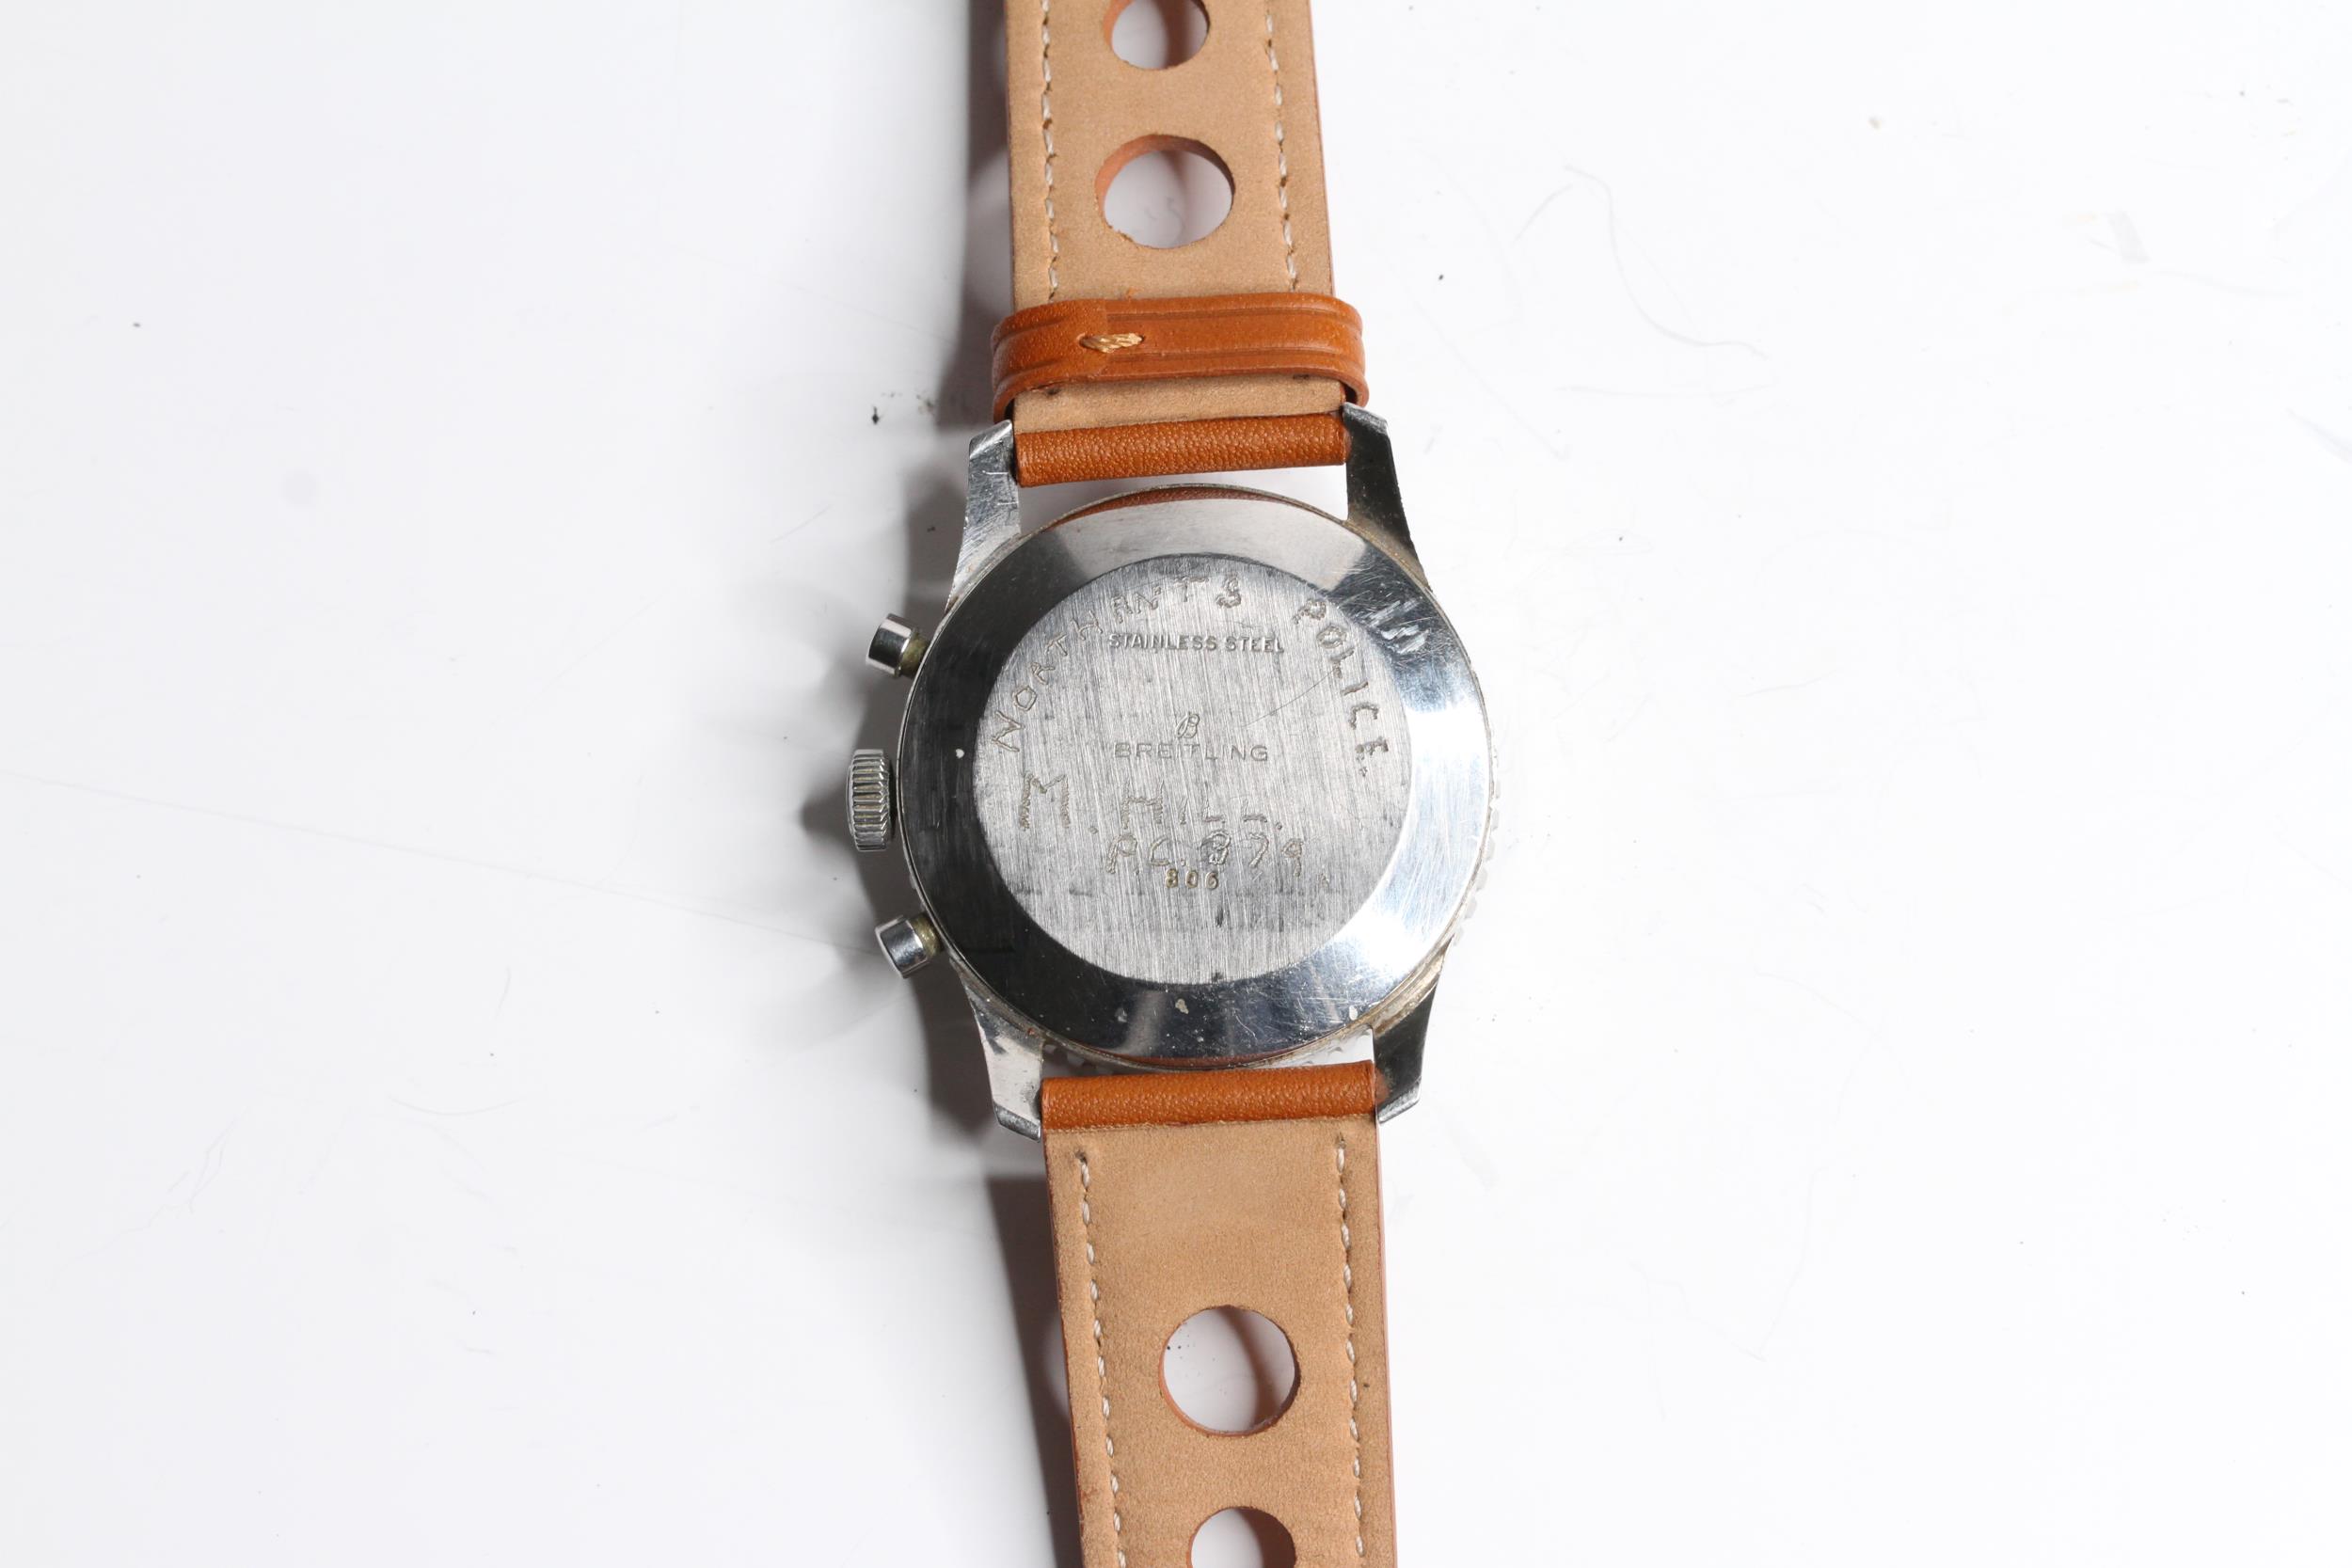 BREITLING NAVITIMER 806 POLICE OFFICER WATCH WITH PAPERS 1971 - Image 3 of 4